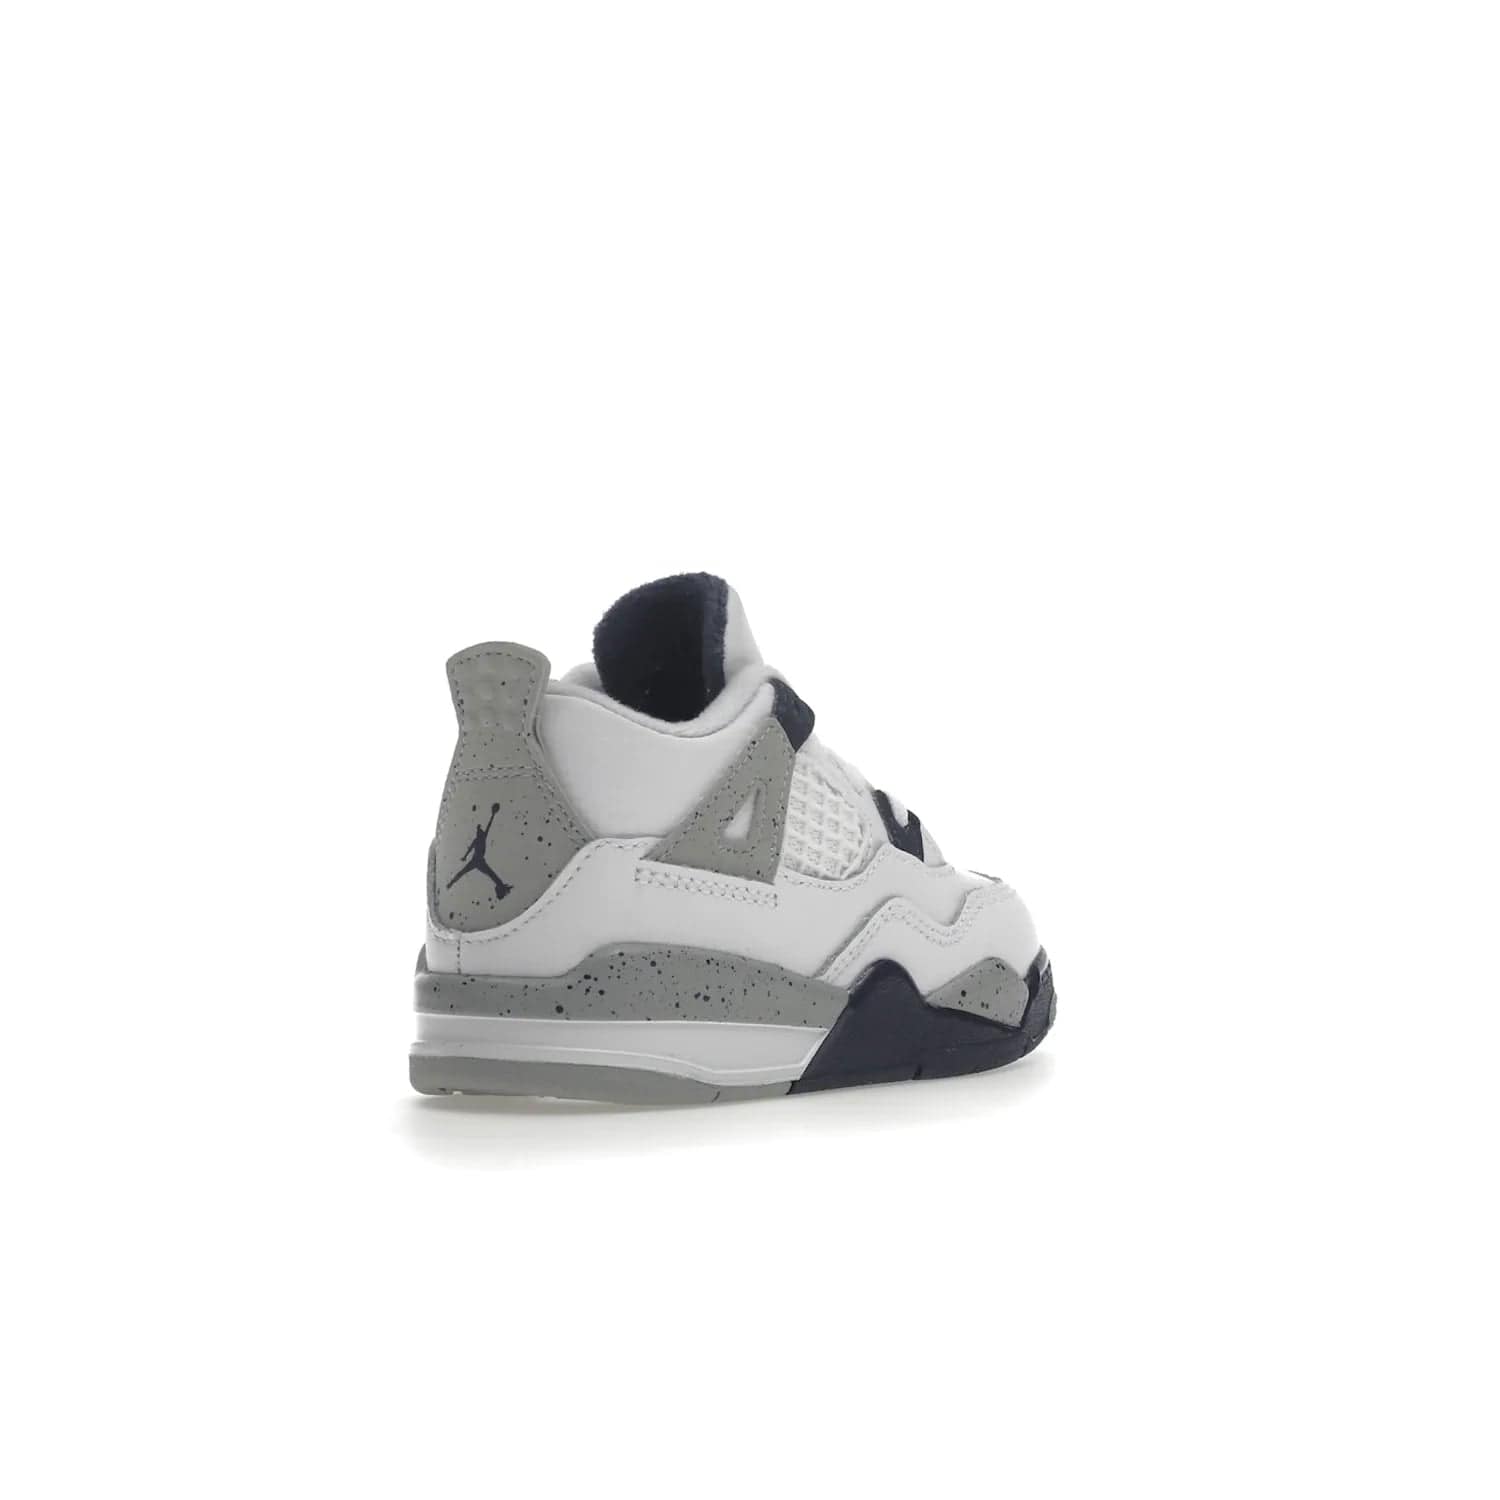 Jordan 4 Retro Midnight Navy (TD) - Image 32 - Only at www.BallersClubKickz.com - Introducing the Jordan 4 Retro Midnight Navy (TD) for kids. White leather upper with navy and grey accents plus fire red detailing. Perfect for everyday wear. Get yours before they sell out.